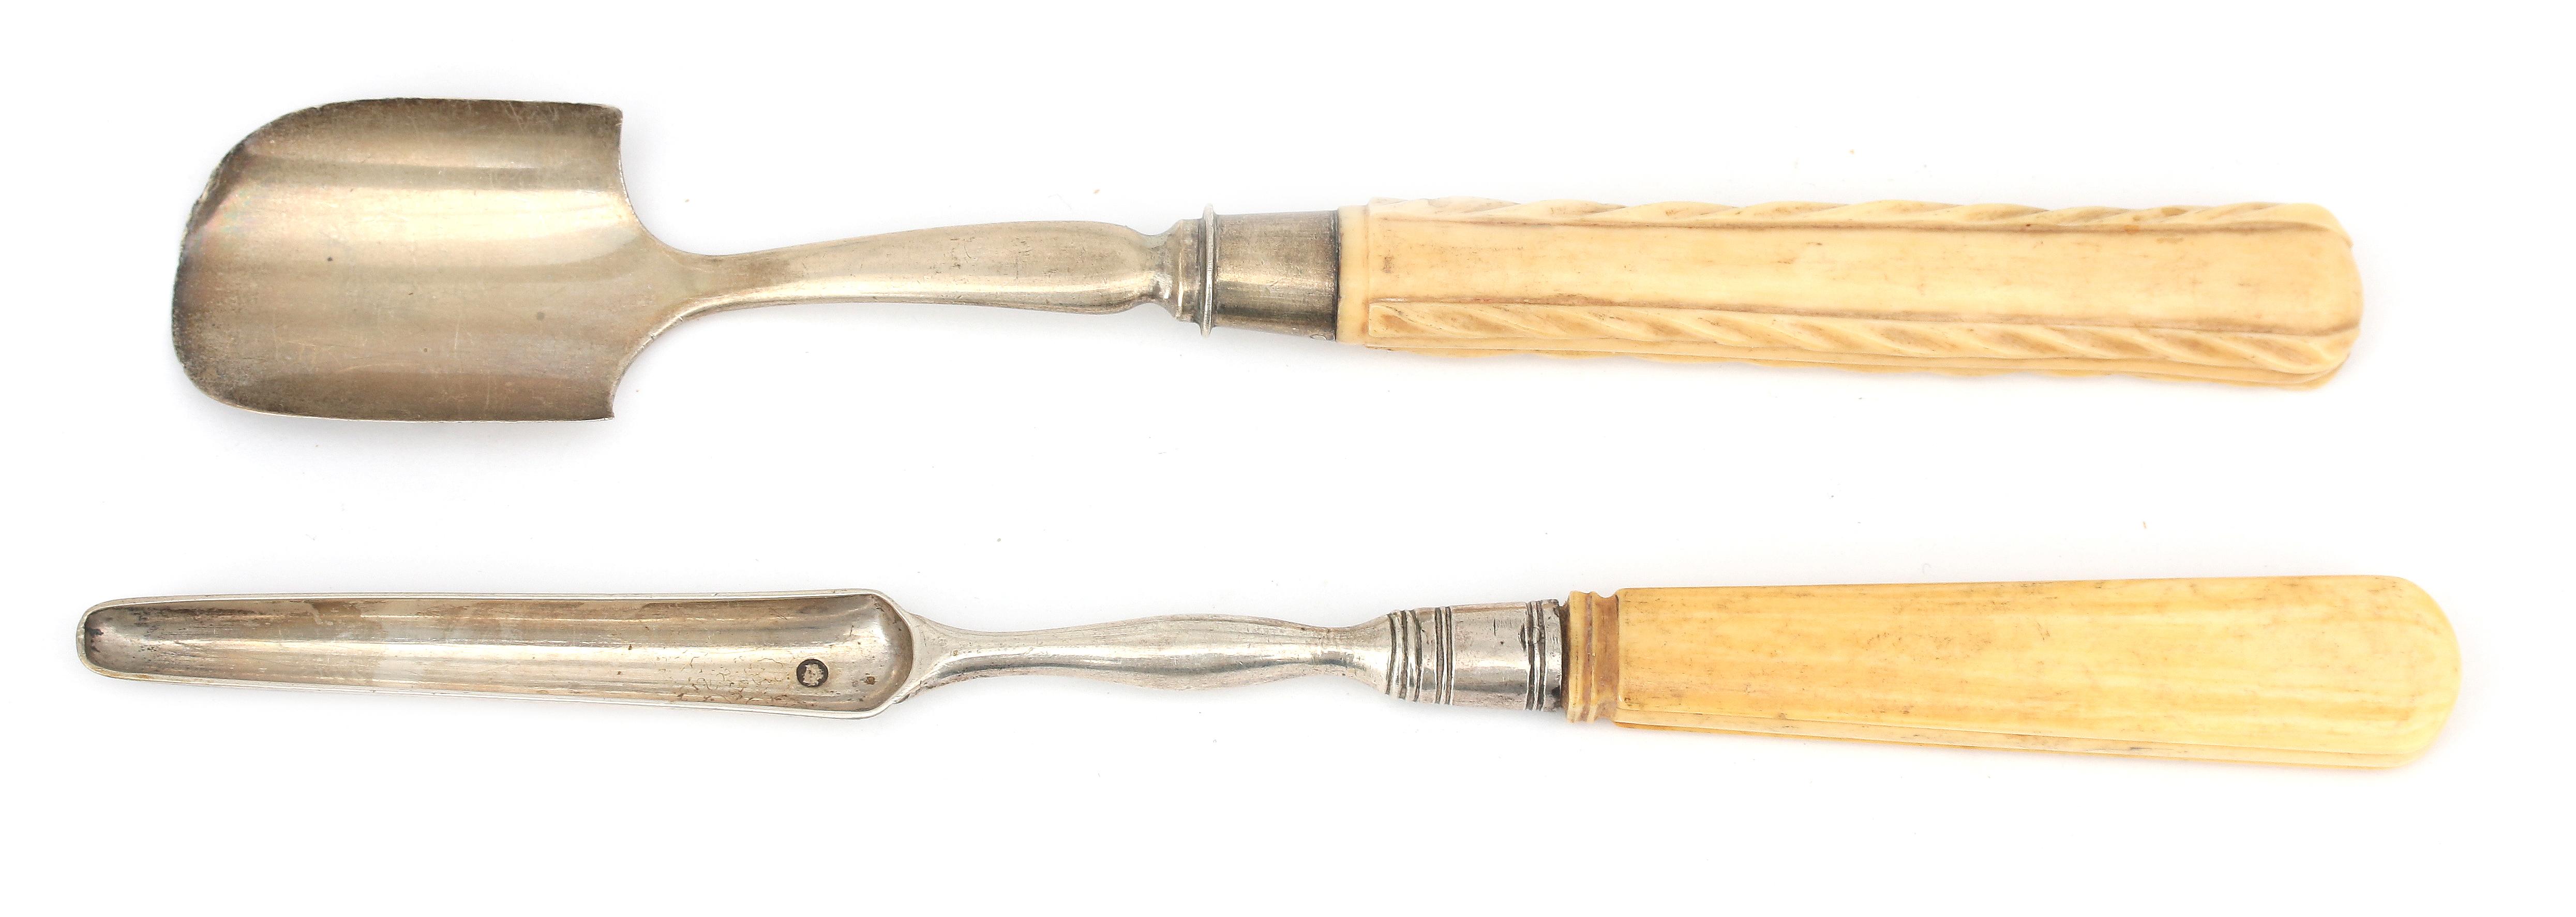 A silver cheese scoop and marrow scoop.